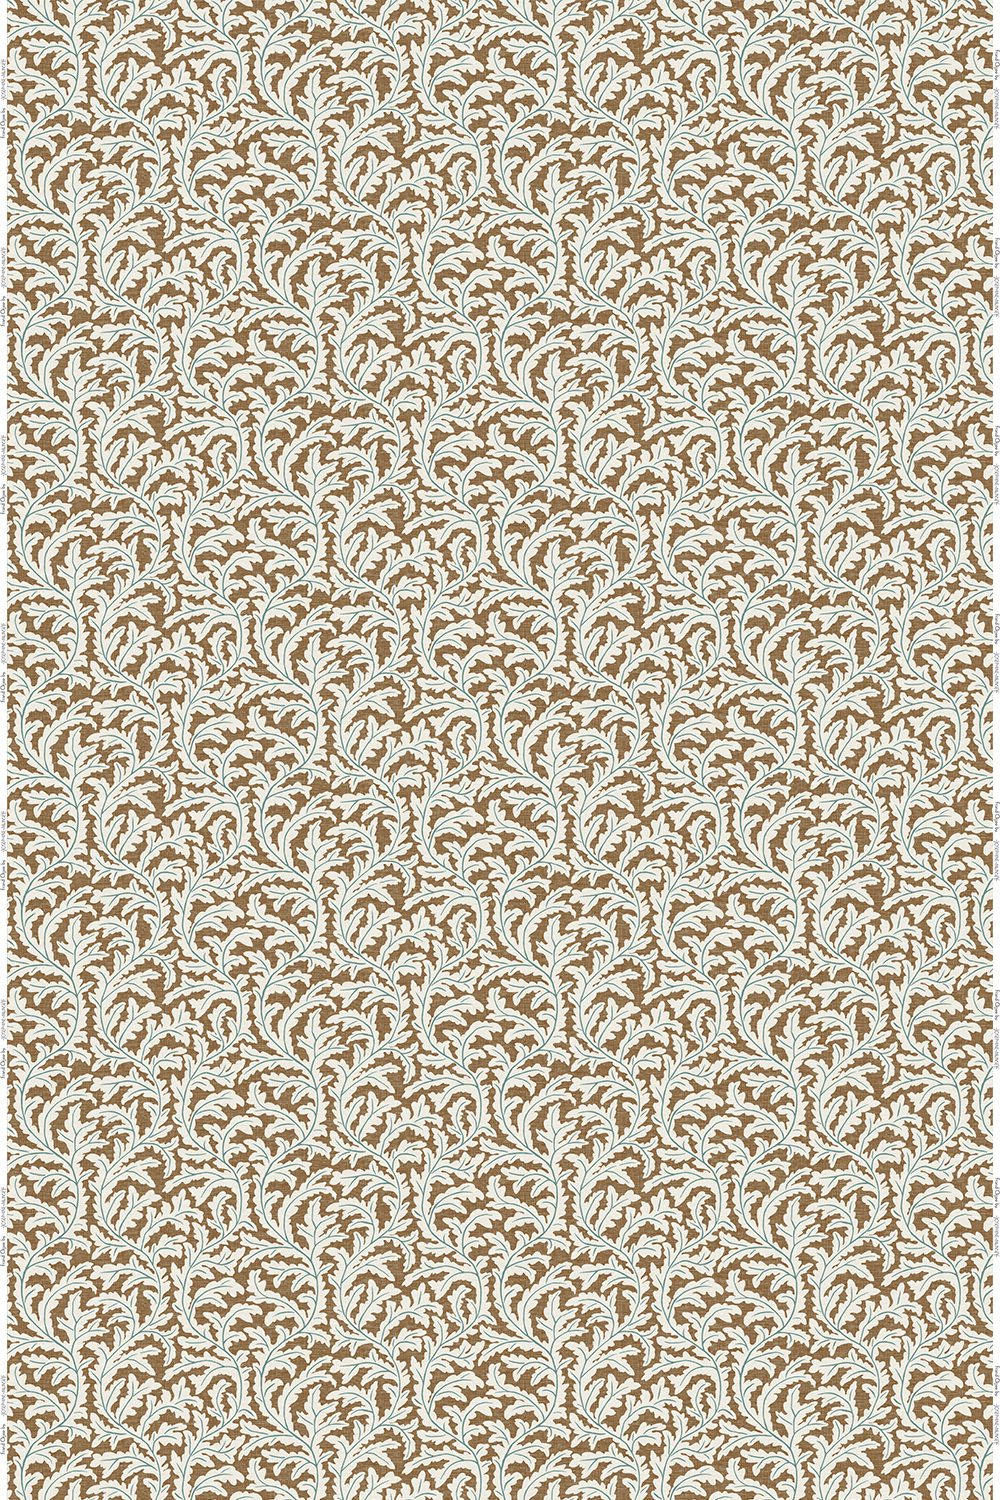 JMF-202551-PLN | Frond Ogee | Orange and Blue | Pure Linen | Full Repeat